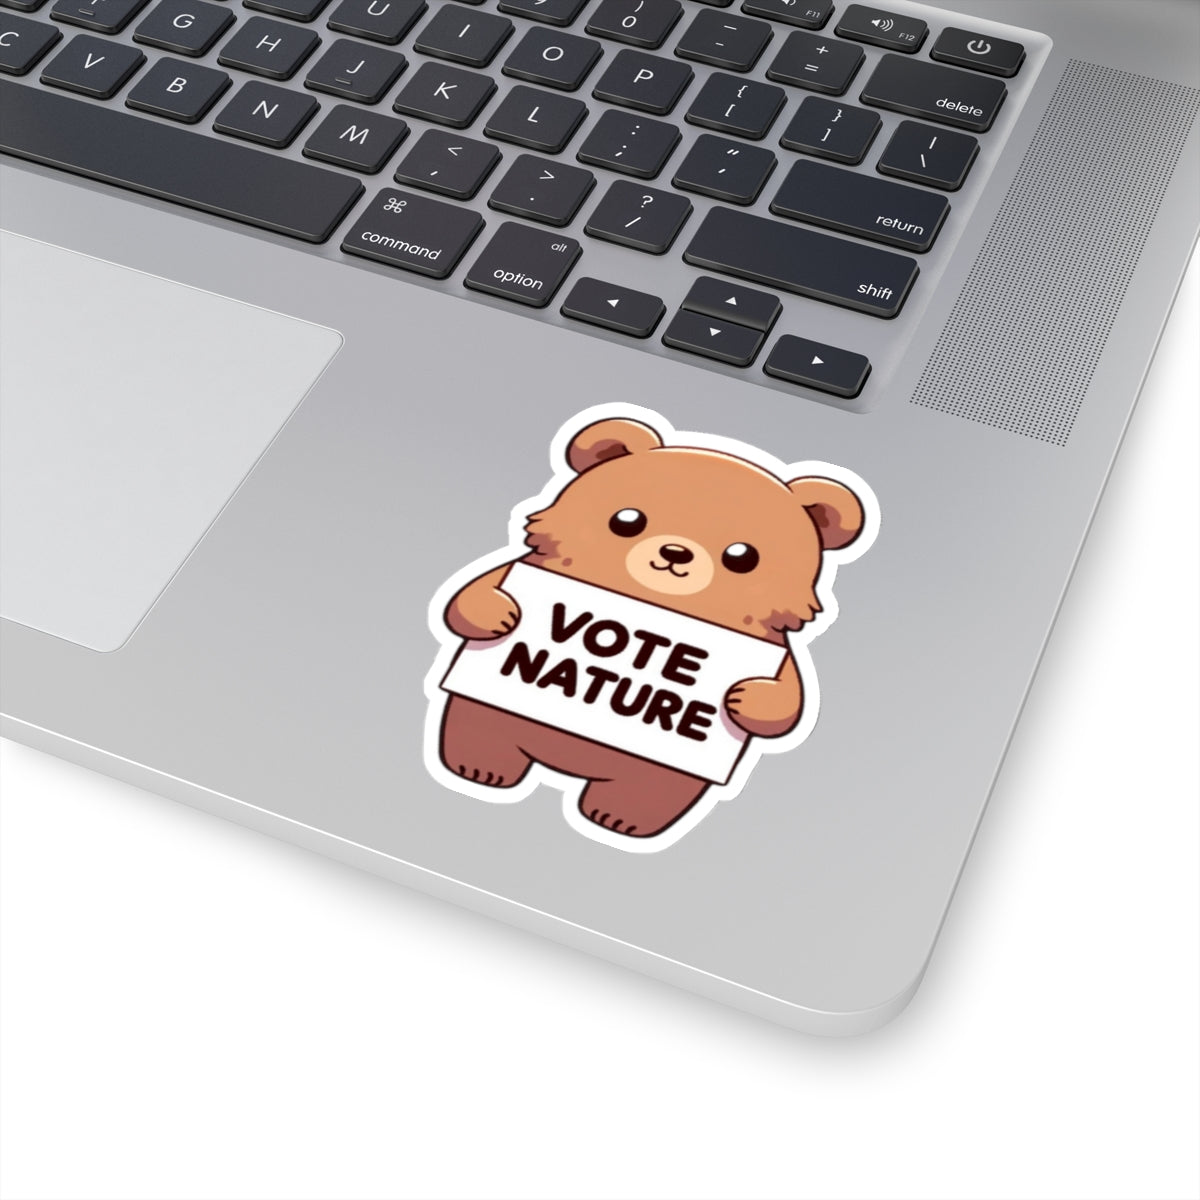 Inspirational Cute Grizzly Bear Statement vinyl Sticker: Vote Nature! for laptop, kindle, phone, ipad, instrument case, notebook, mood board